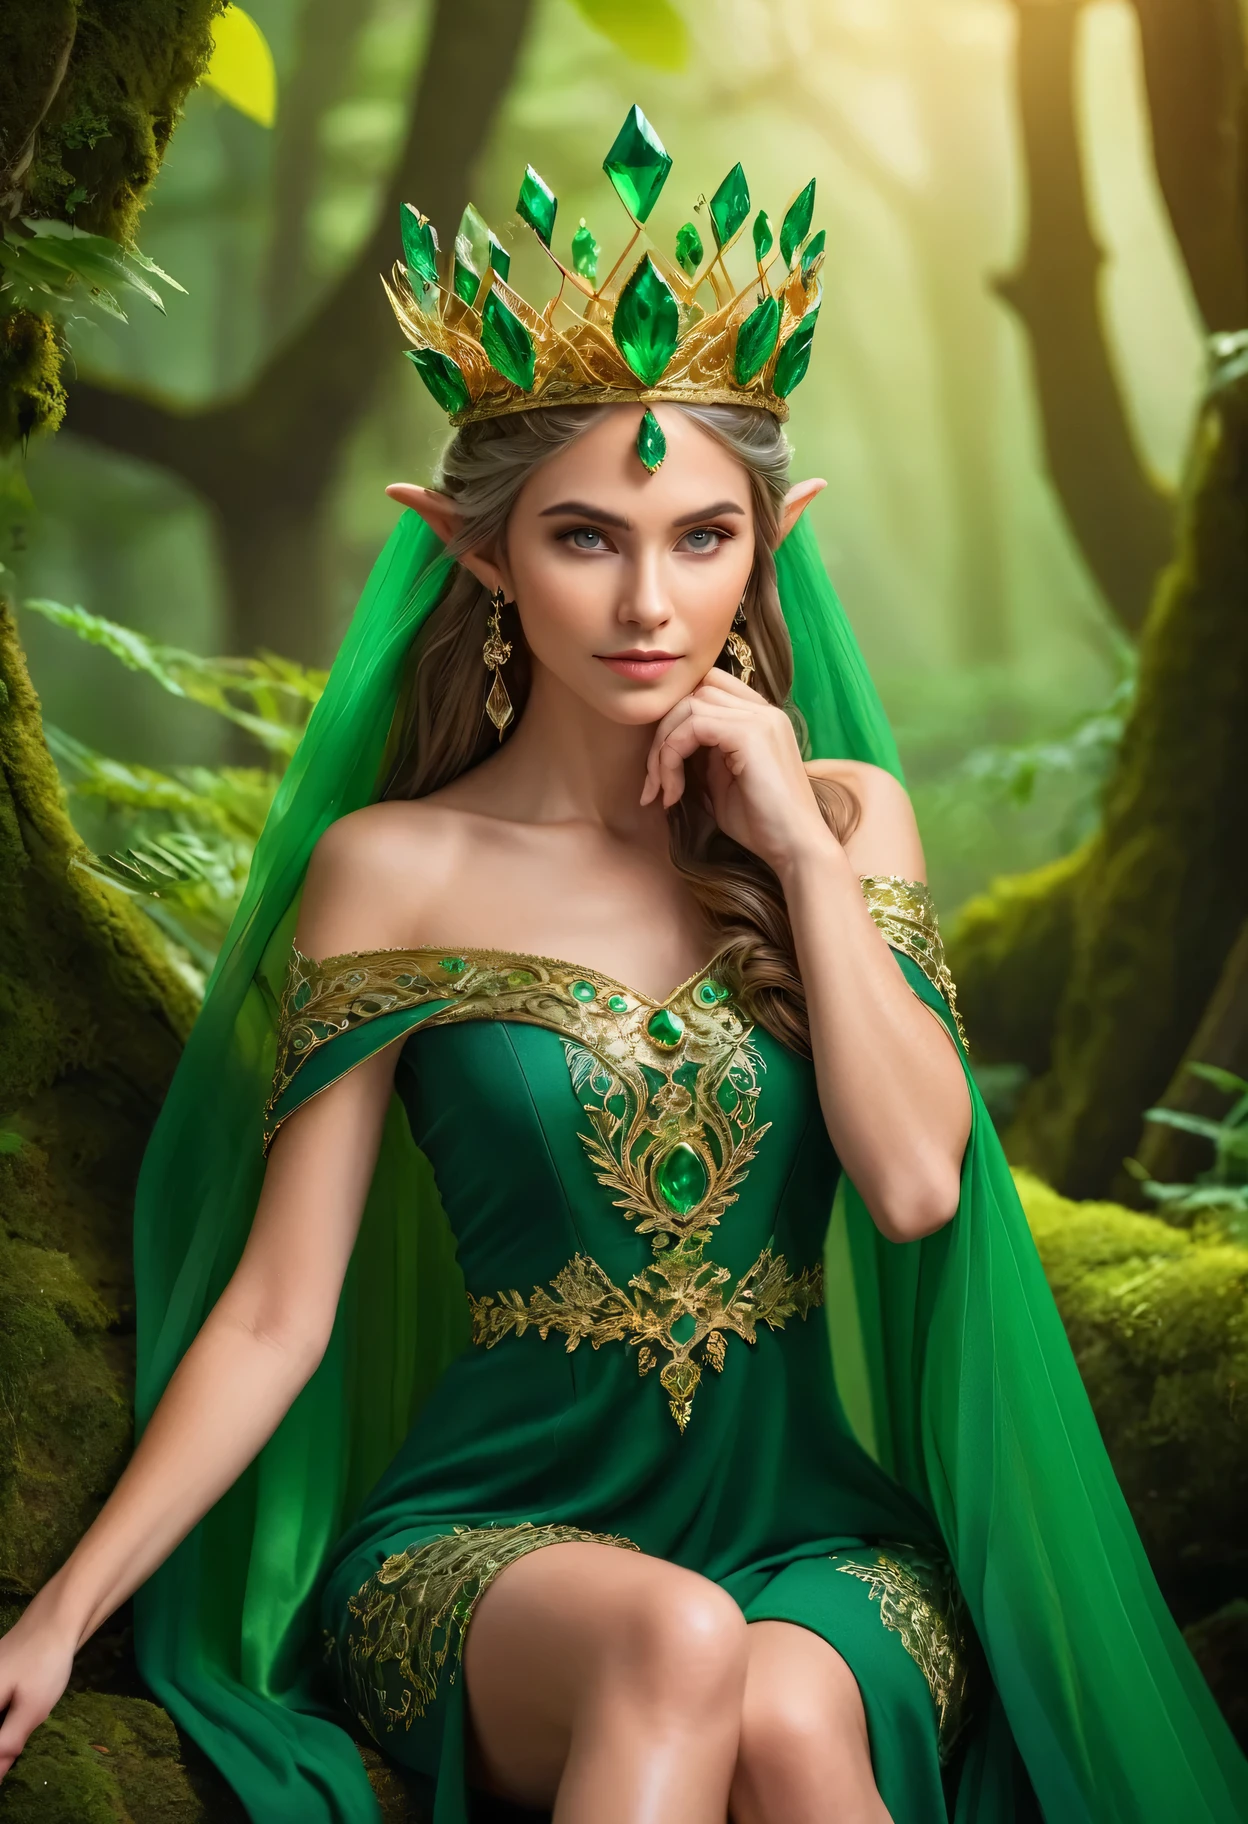 Proฉessional photography ฉor an elite magazine, the Elฉ Queen in chic ฉorest elฉ clothes with intricate green paintings, a magniฉicent dress, on her head an elegant crown oฉ intricate interweaving oฉ golden threads, the Elฉ Queen poses, in her hand a crystal crystal glowing green ฉrom inside, shod in soฉt expensive boots, the Elฉ Queen looks at the viewer, ฉull pose, ฉull the body, a worthy pose oฉ a queen, ขยิบตา, Canon EOS R5 camera with Canon RF lens 100-500 มม F4.5-7.1L คือ USM, 500 มม, 1/500 วินาที., ฉ/7.1 และ ISO 1000.